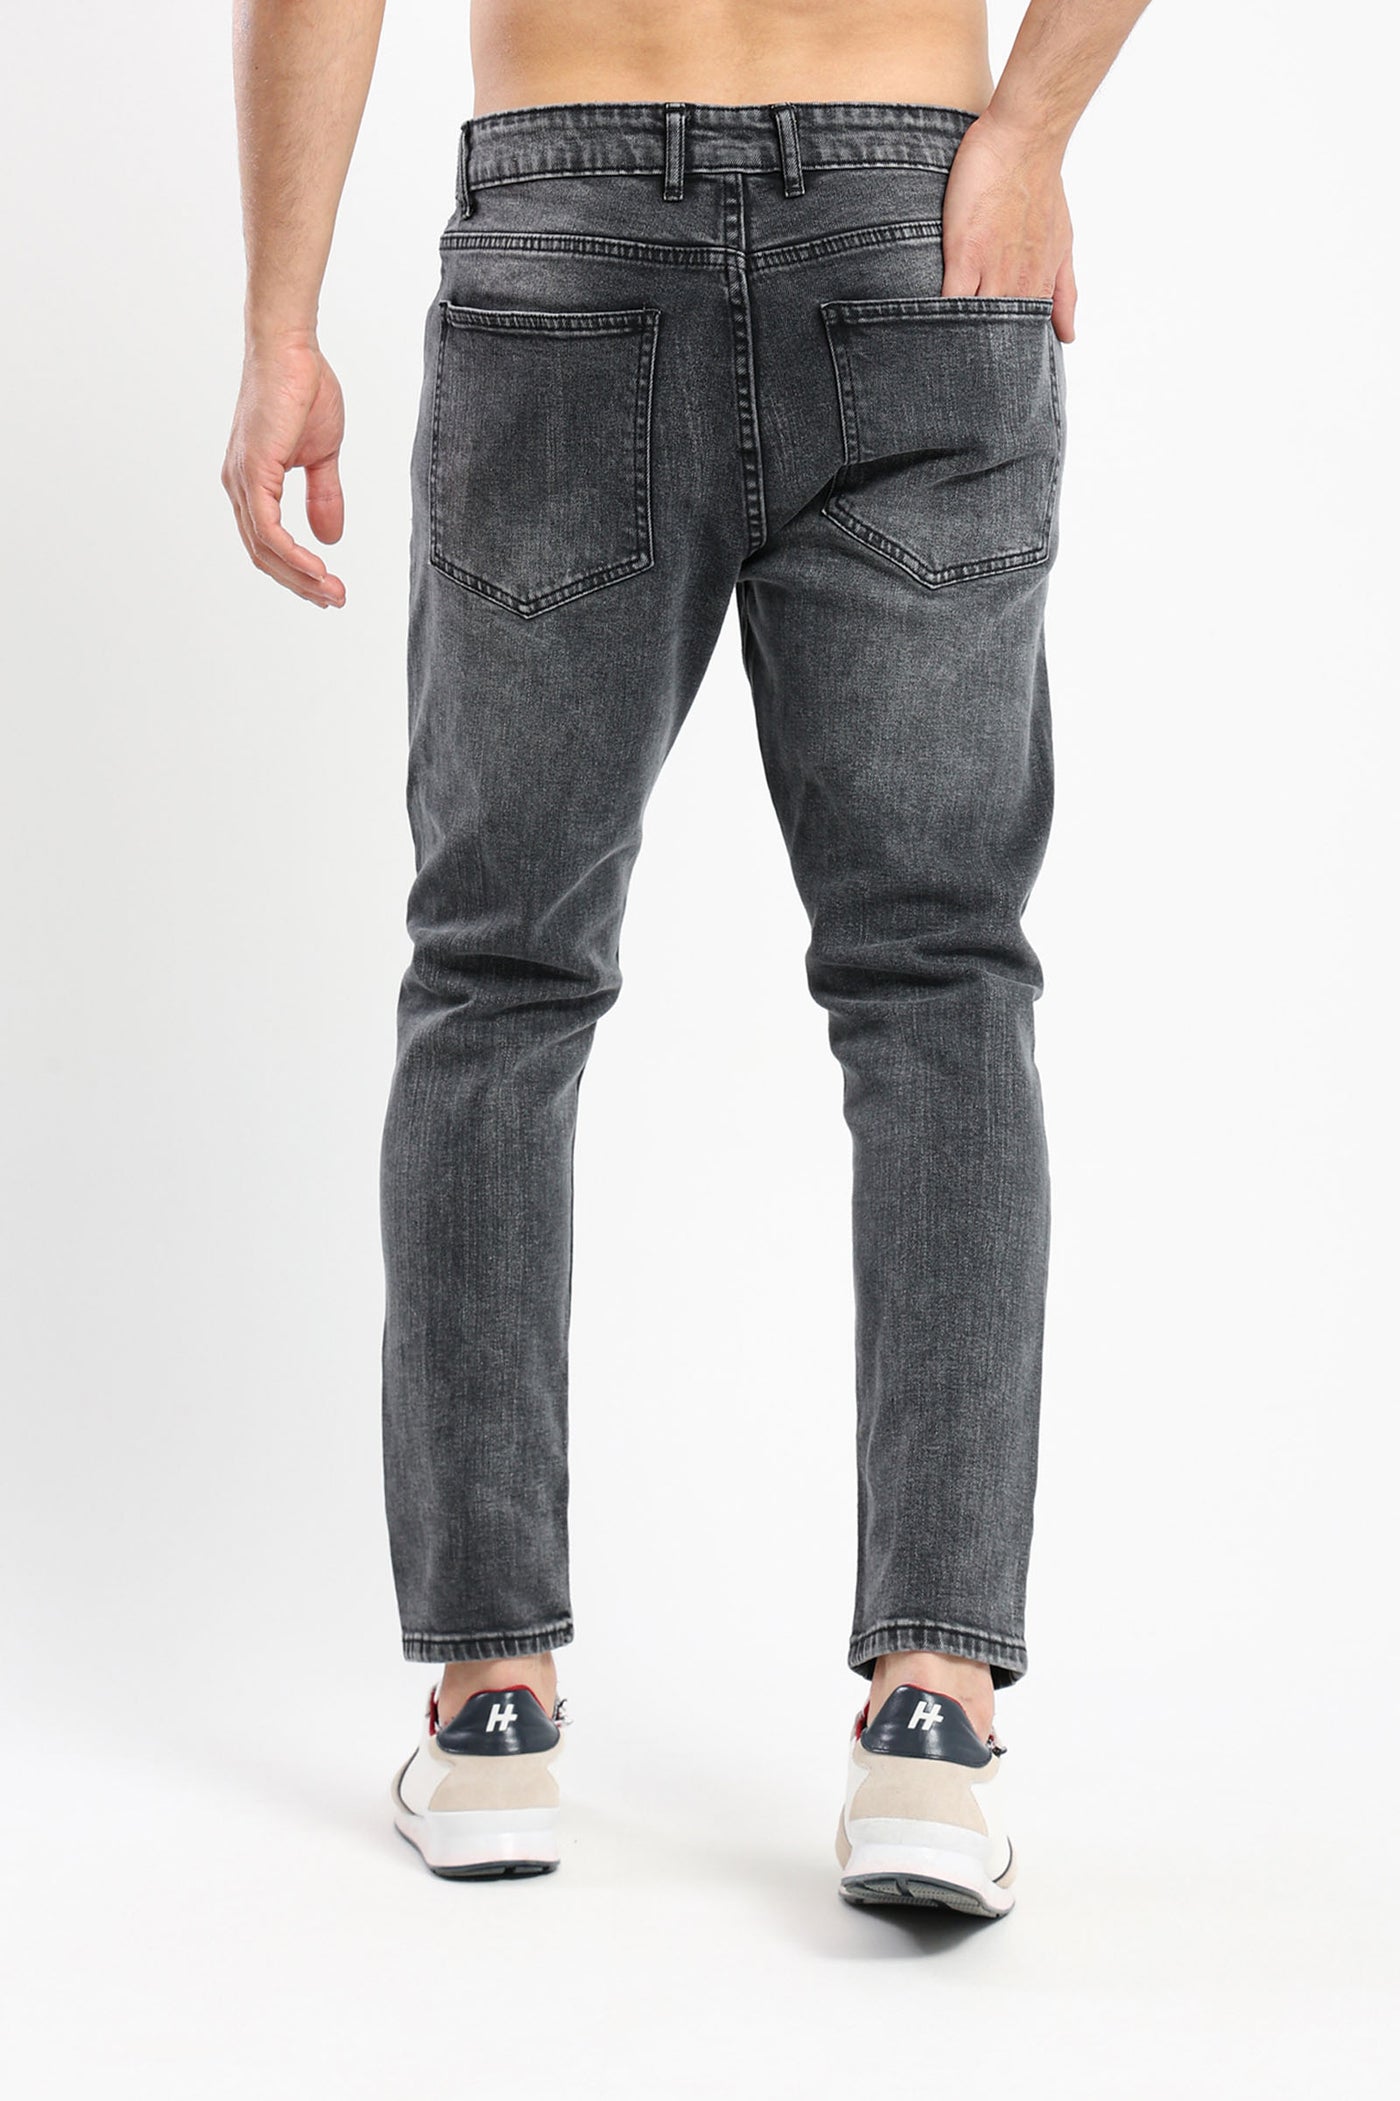 Jeans - Ripped Design - Washed Effect